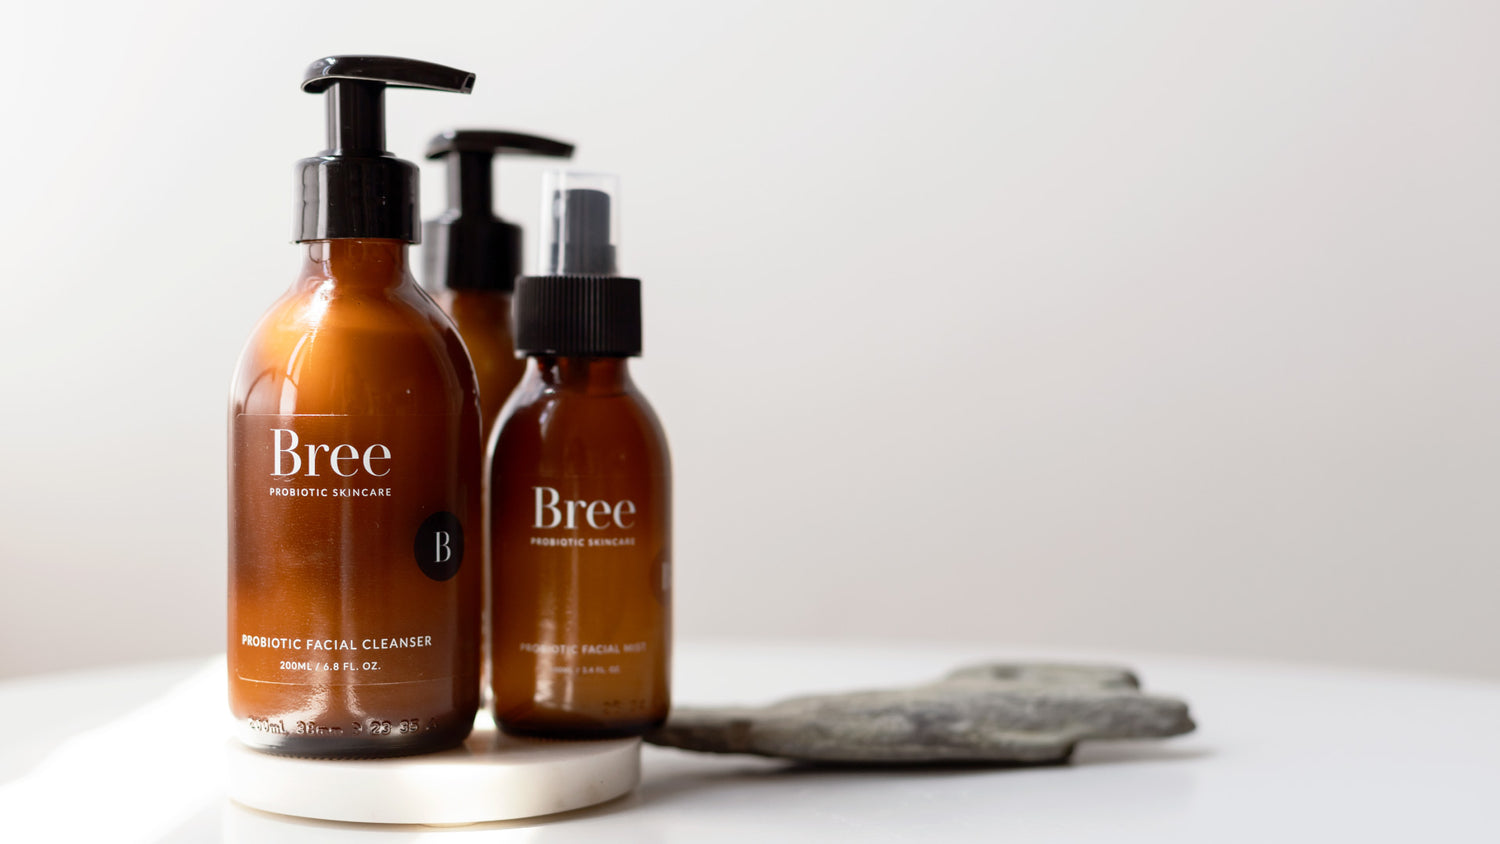 bree probiotic skincare about probiotic skincare page header image with facial cleanser 